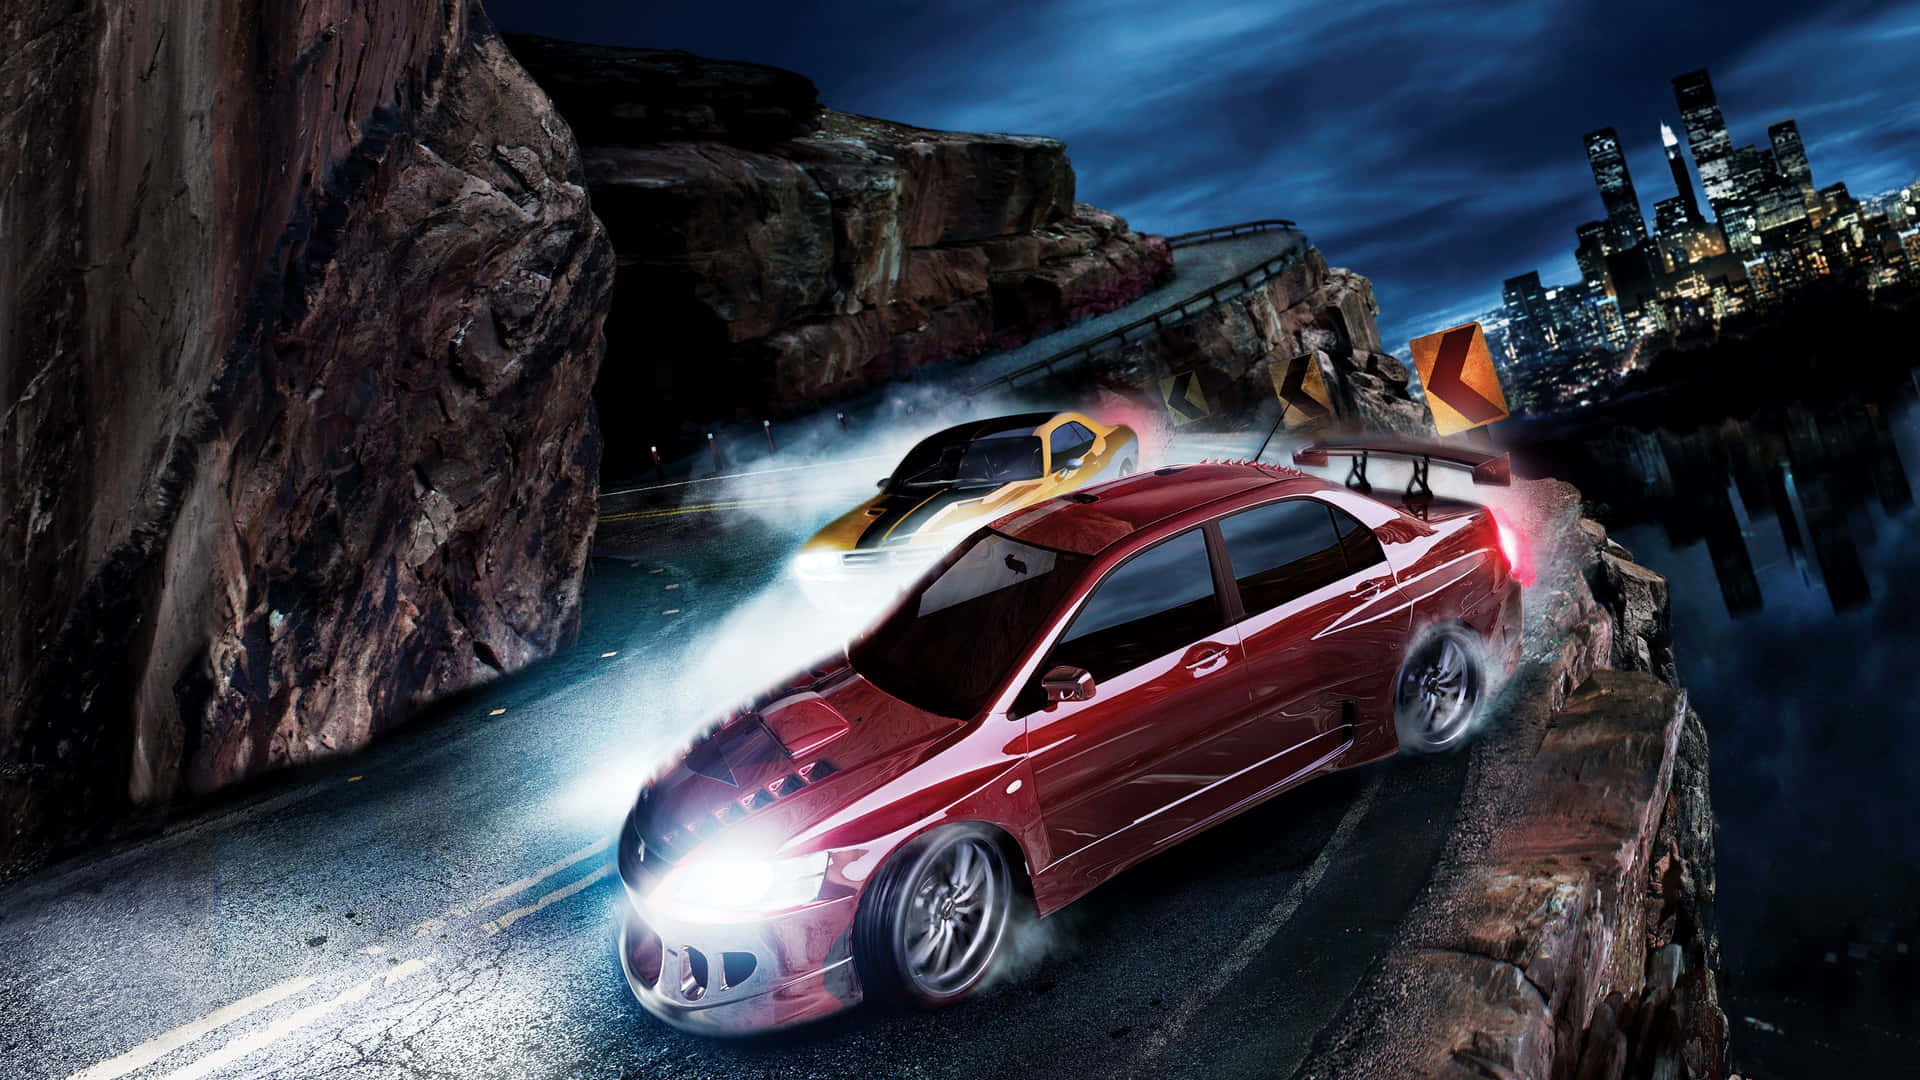 Break the Limits and Experience The Thrills of NFS Wallpaper